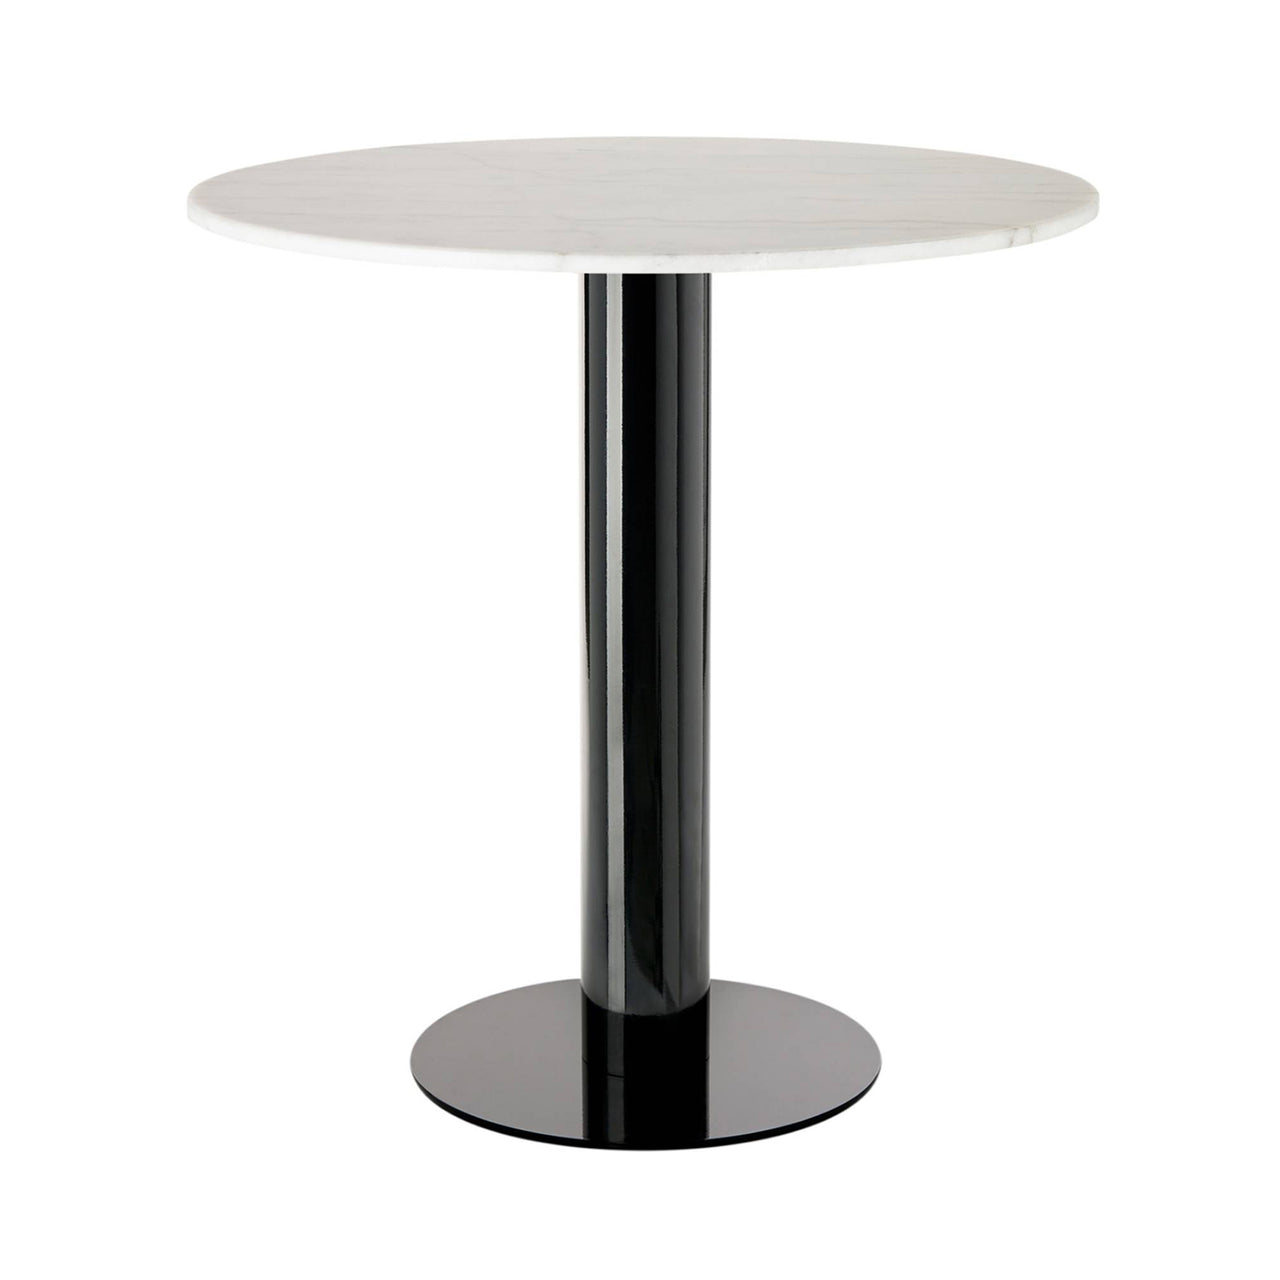 Tube High Table: Large - 35.4